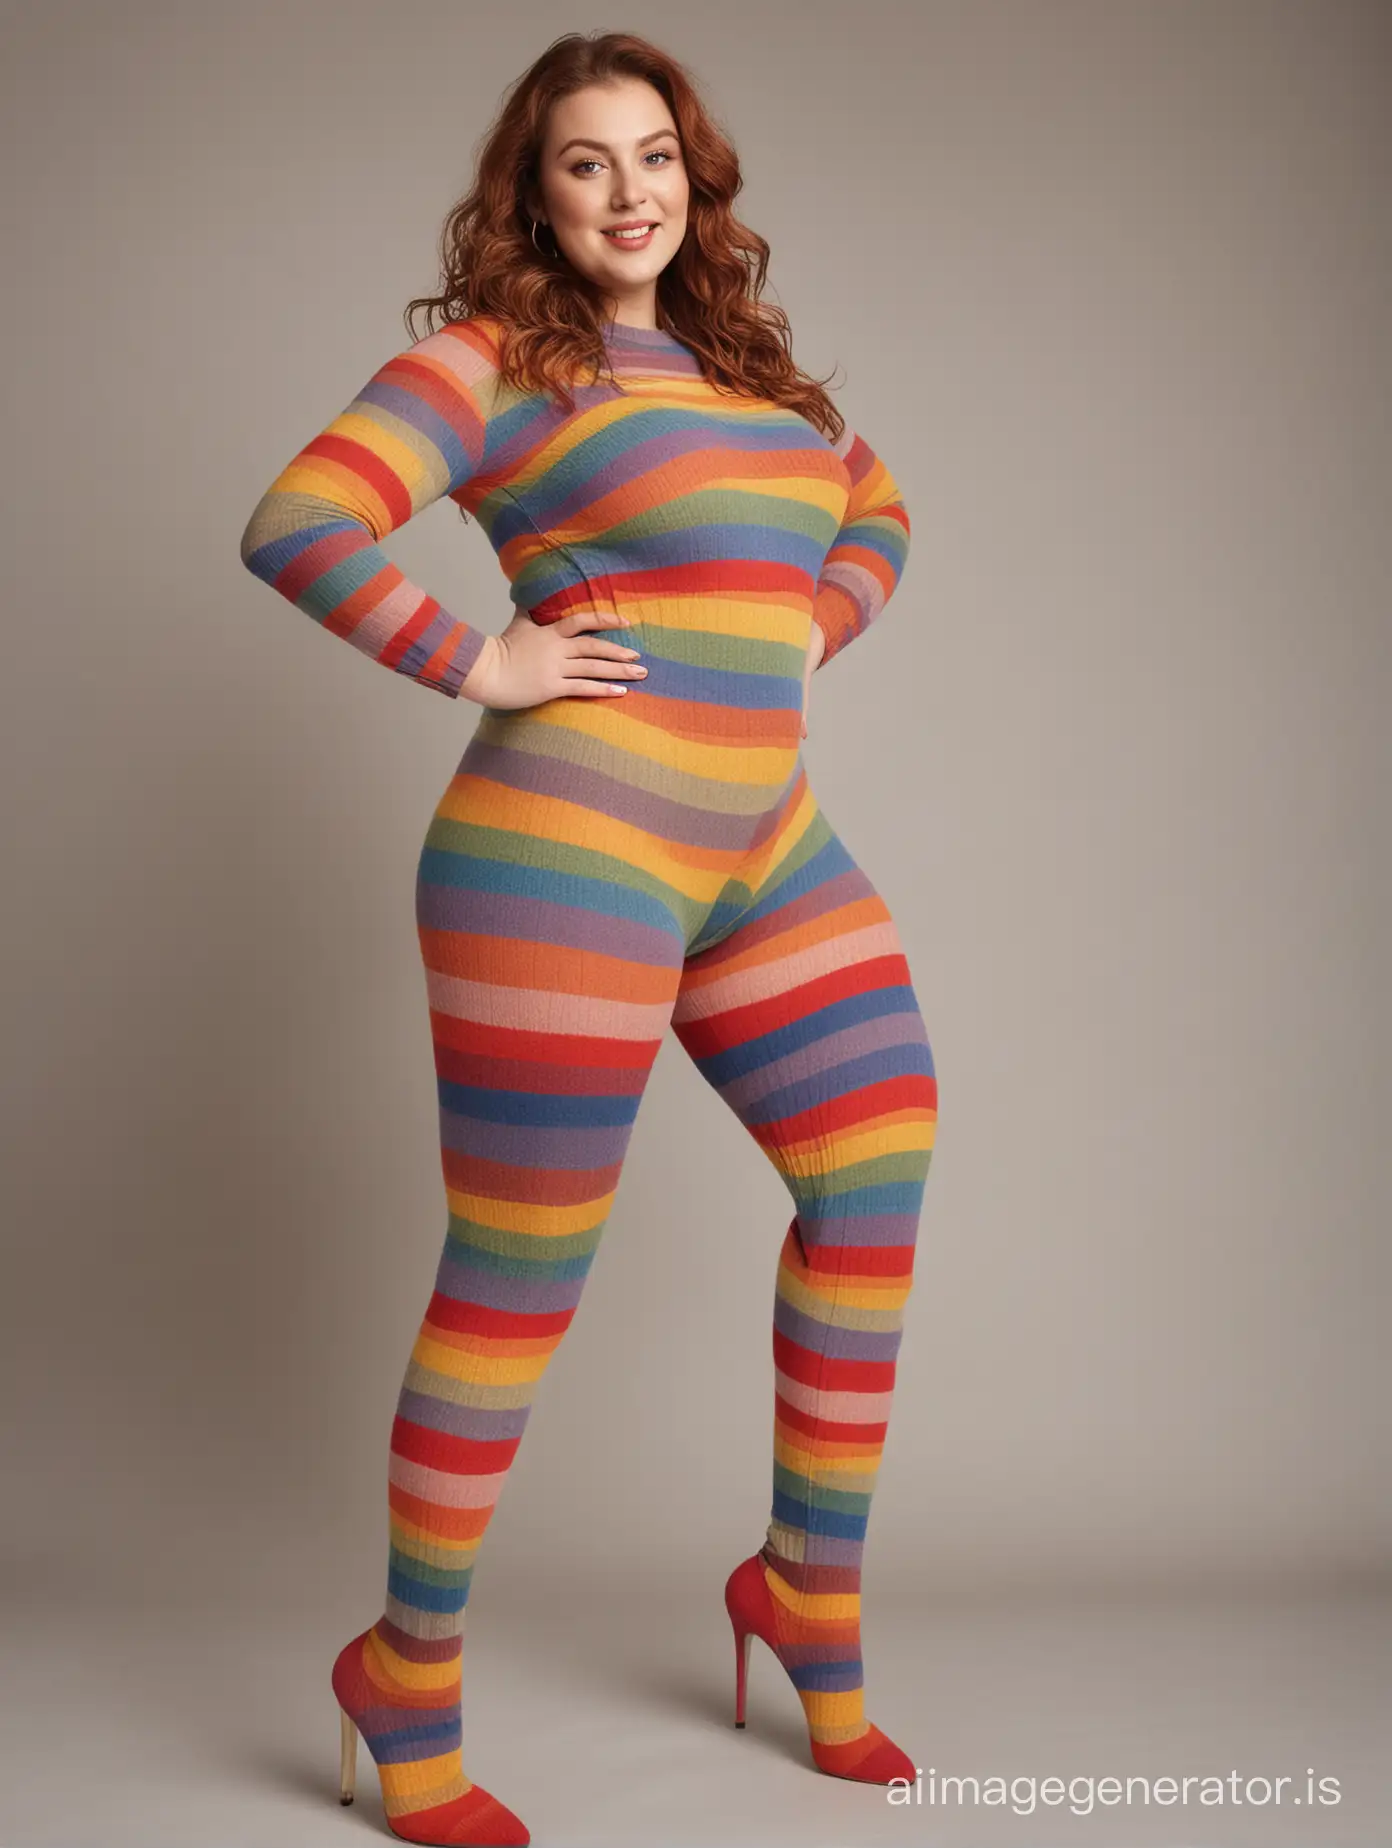 Curvy-Woman-Wearing-Colorful-Rainbow-Wool-Tights-and-High-Heels